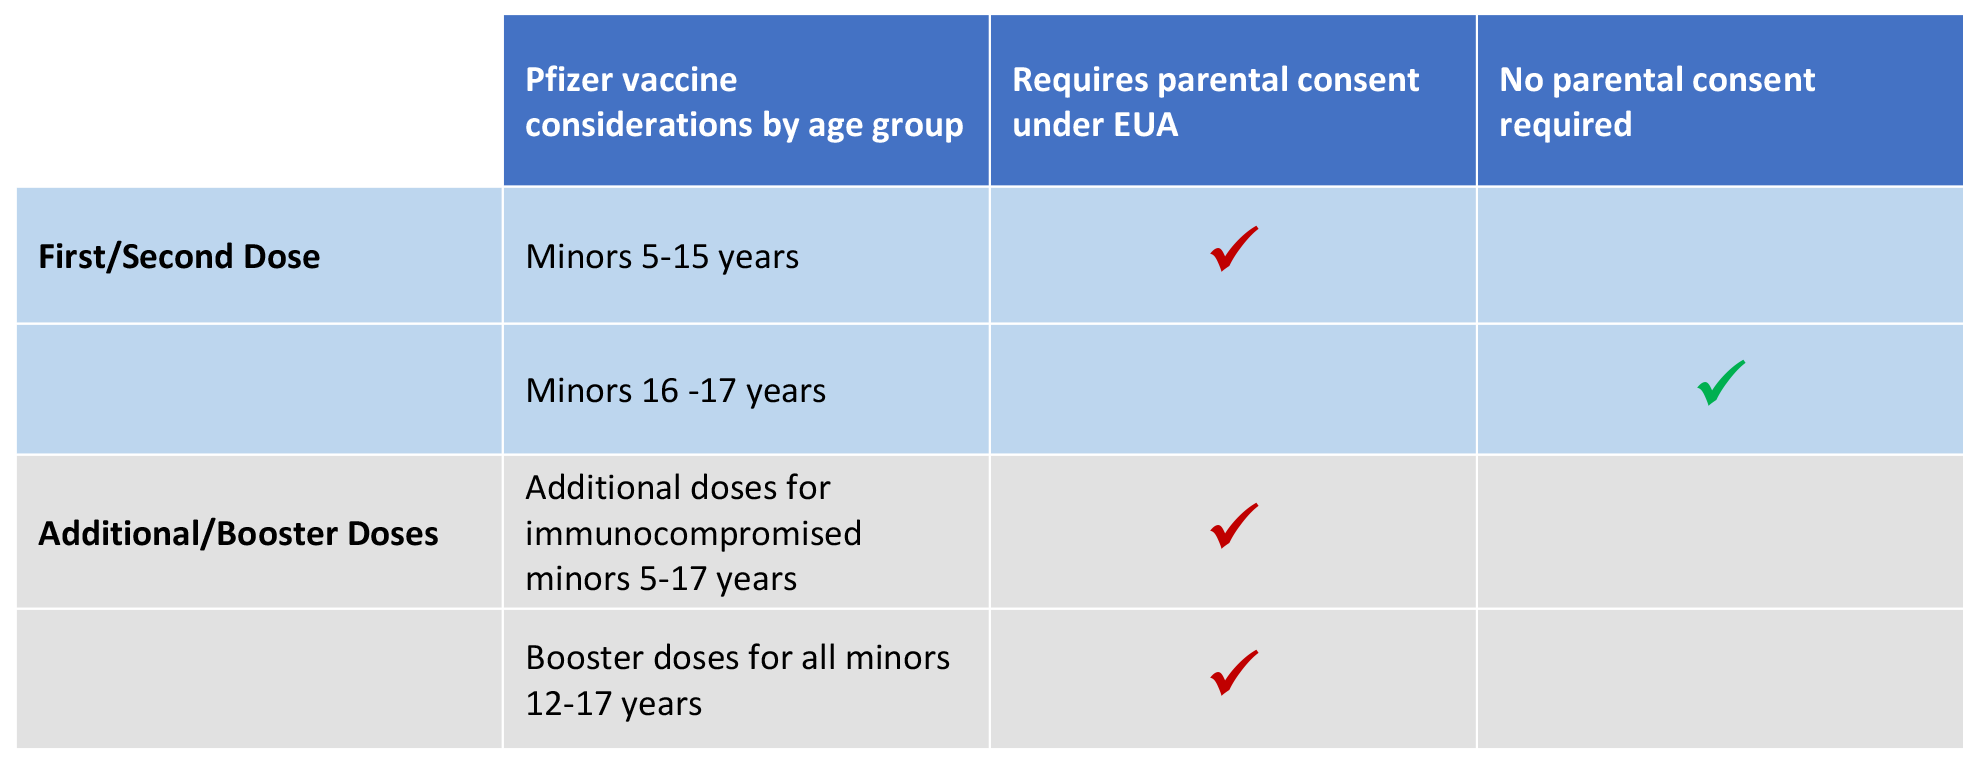 Table of Pfizer vaccine considerations by age group